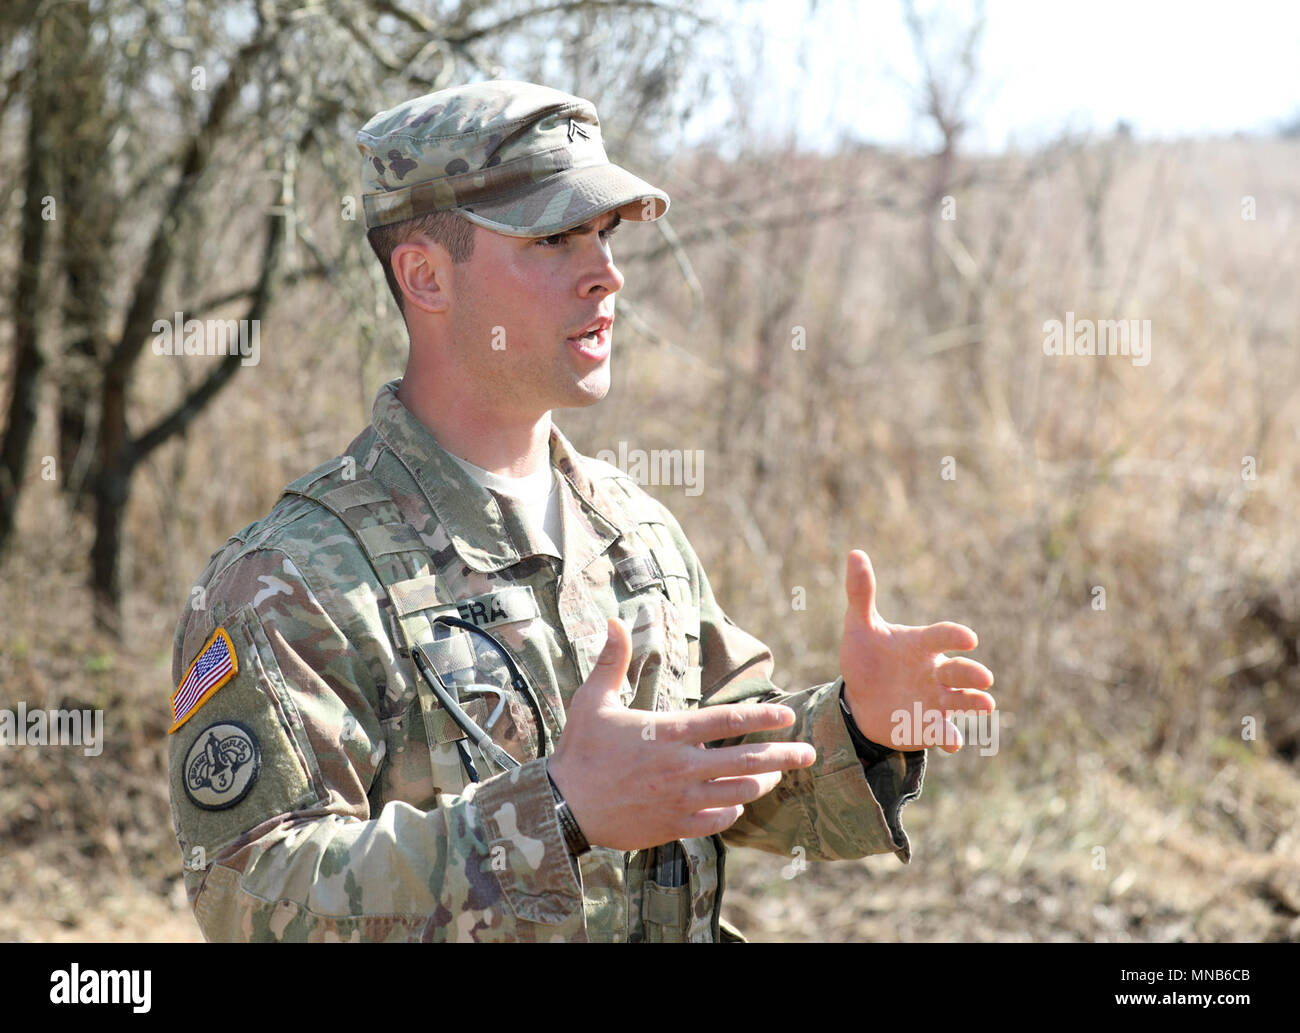 A U.S. Army Soldier with the 78th Training Division, instructs Soldiers in squad tactics during the Combat Support Training Exercise (CSTX)  78-18-03 at Fort Knox, Kentucky, March 15, 2018. CSTX 78-18-03 is a training exercise that ensures America's Army Reserve units and Soldiers are trained and ready to deploy on short-notice and bring capable, combat-ready and lethal firepower in support of the Army and our joint partners anywhere in the world.  (U.S. Army Reserve Stock Photo